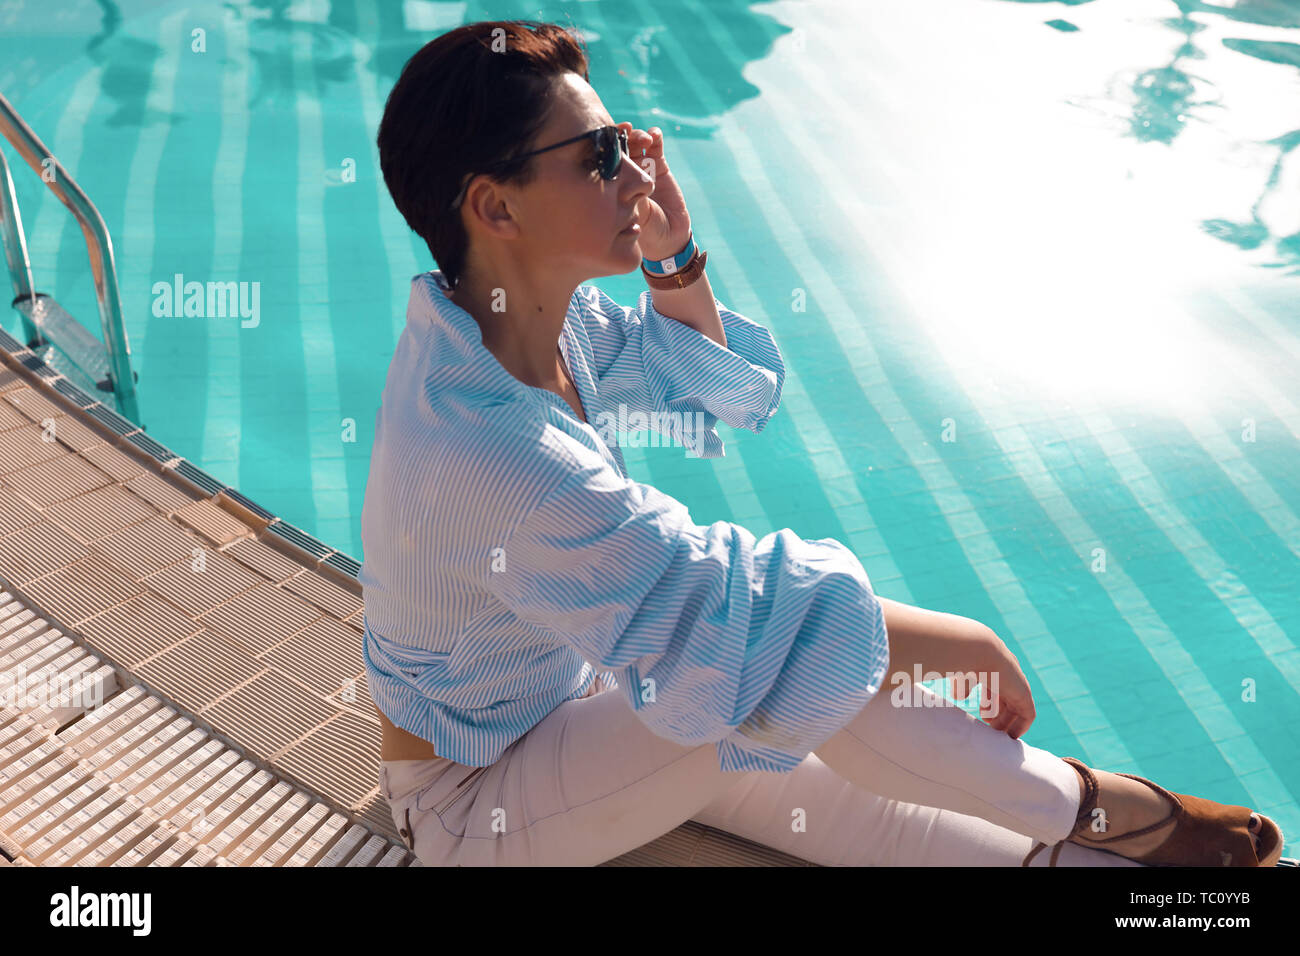 Brunette lady sitting near the pool with clear water. Wearing casual clothes, shirt with long sleeves and white jeans. Sunglasses on the face, short Stock Photo